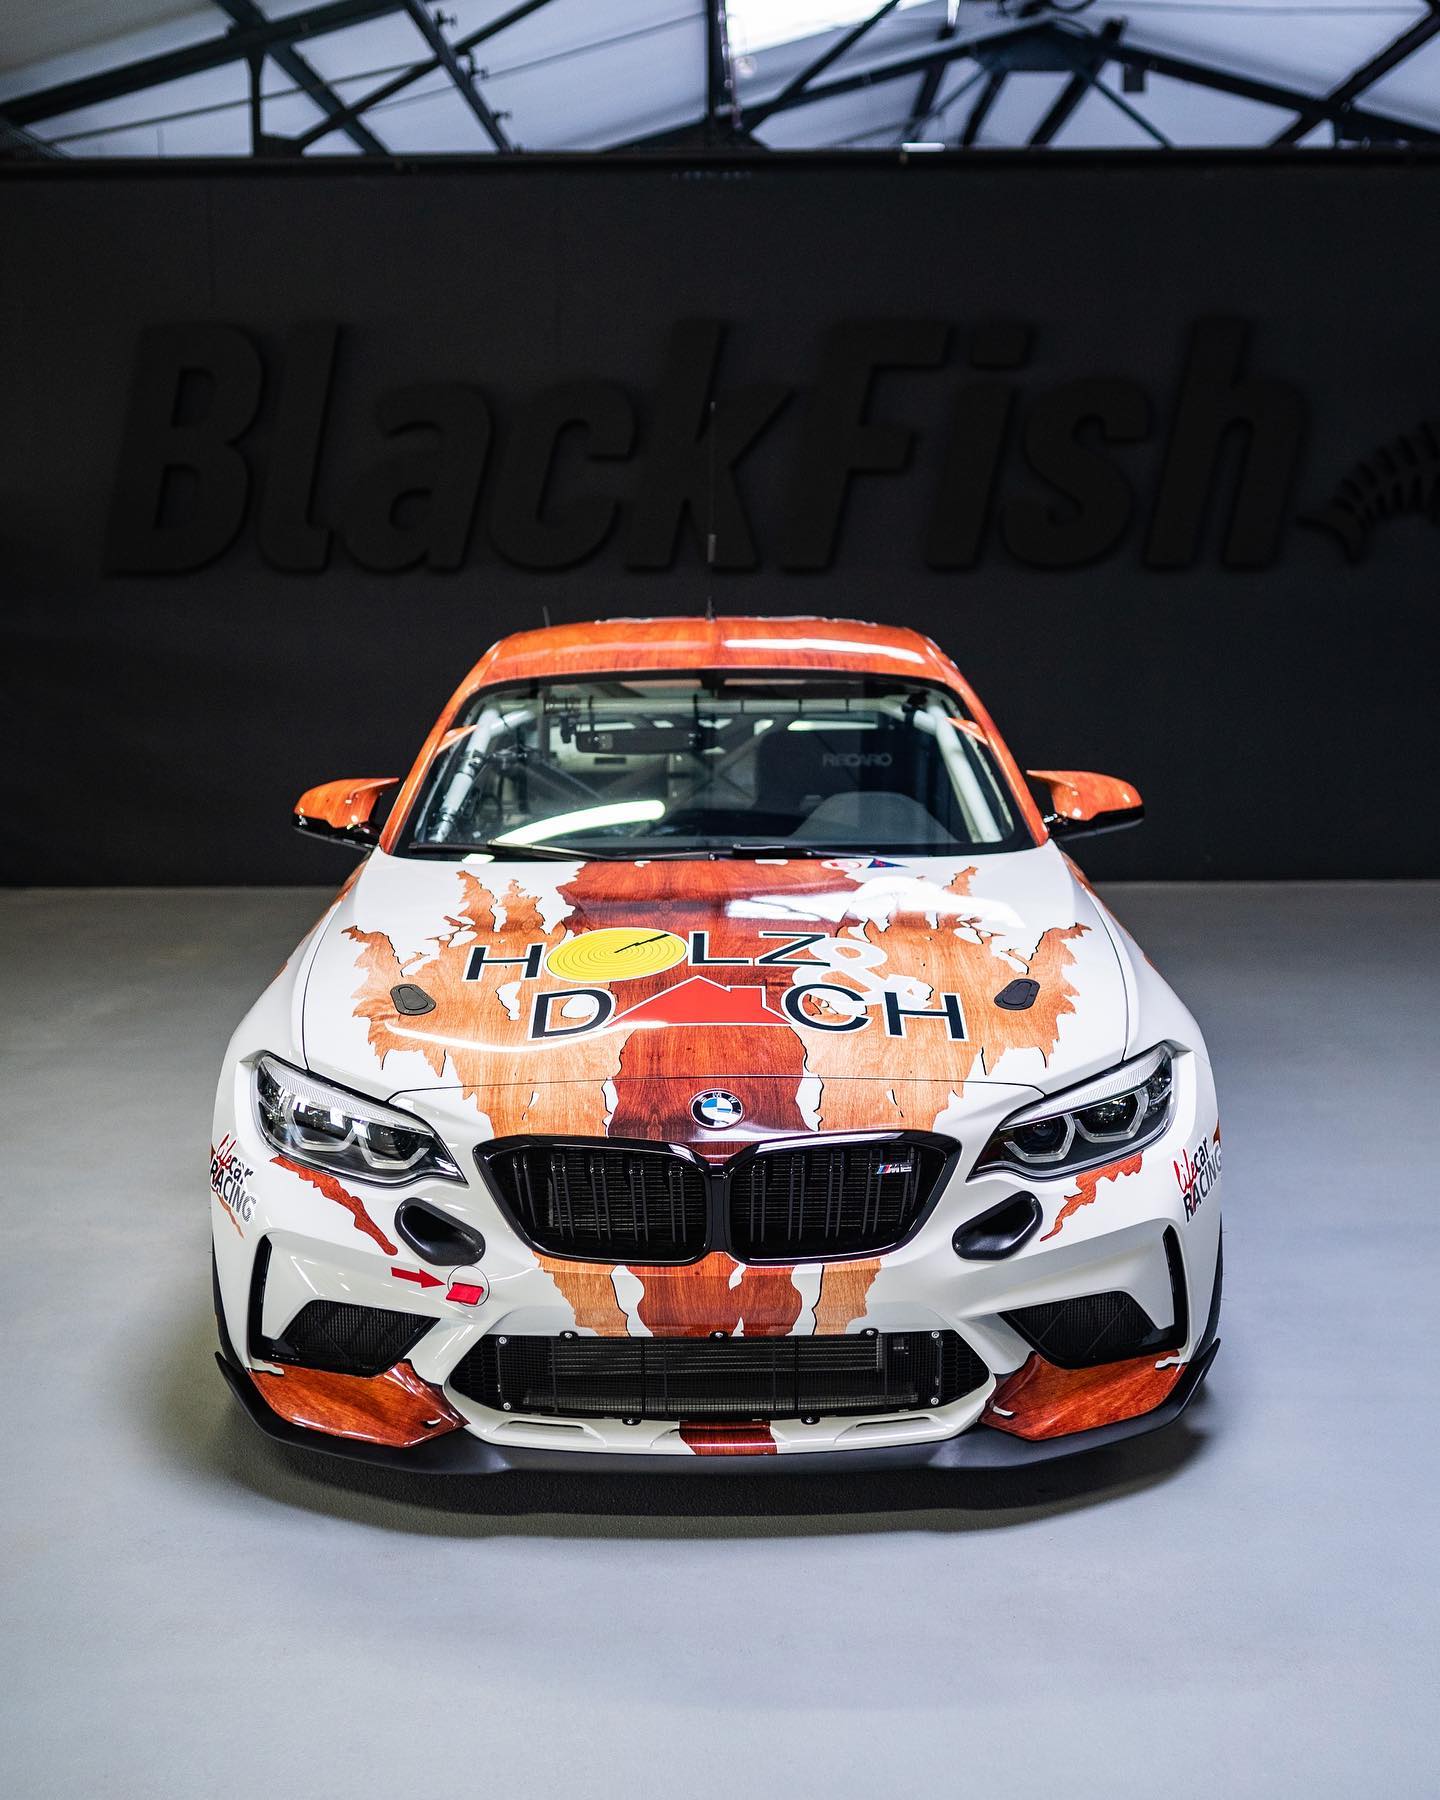 New year = new looks! Who is going to be first with a new design for 2022 racing season? 🧐😊

#blackfishgraphics #lifecarracing #bmwm2cs #bmw #bmwm2 #bmwm2f87 #m2clubsport #racecar #bmwm #bmwmotorsport #bmwlove #bmwlife #bmwrepost #nurburgring #testdays #nordschleife #bmwlovers #wrapping #wrappingcars #design #wrapped #custom #customwrap #colorchange #ppf #vinyl #stickers